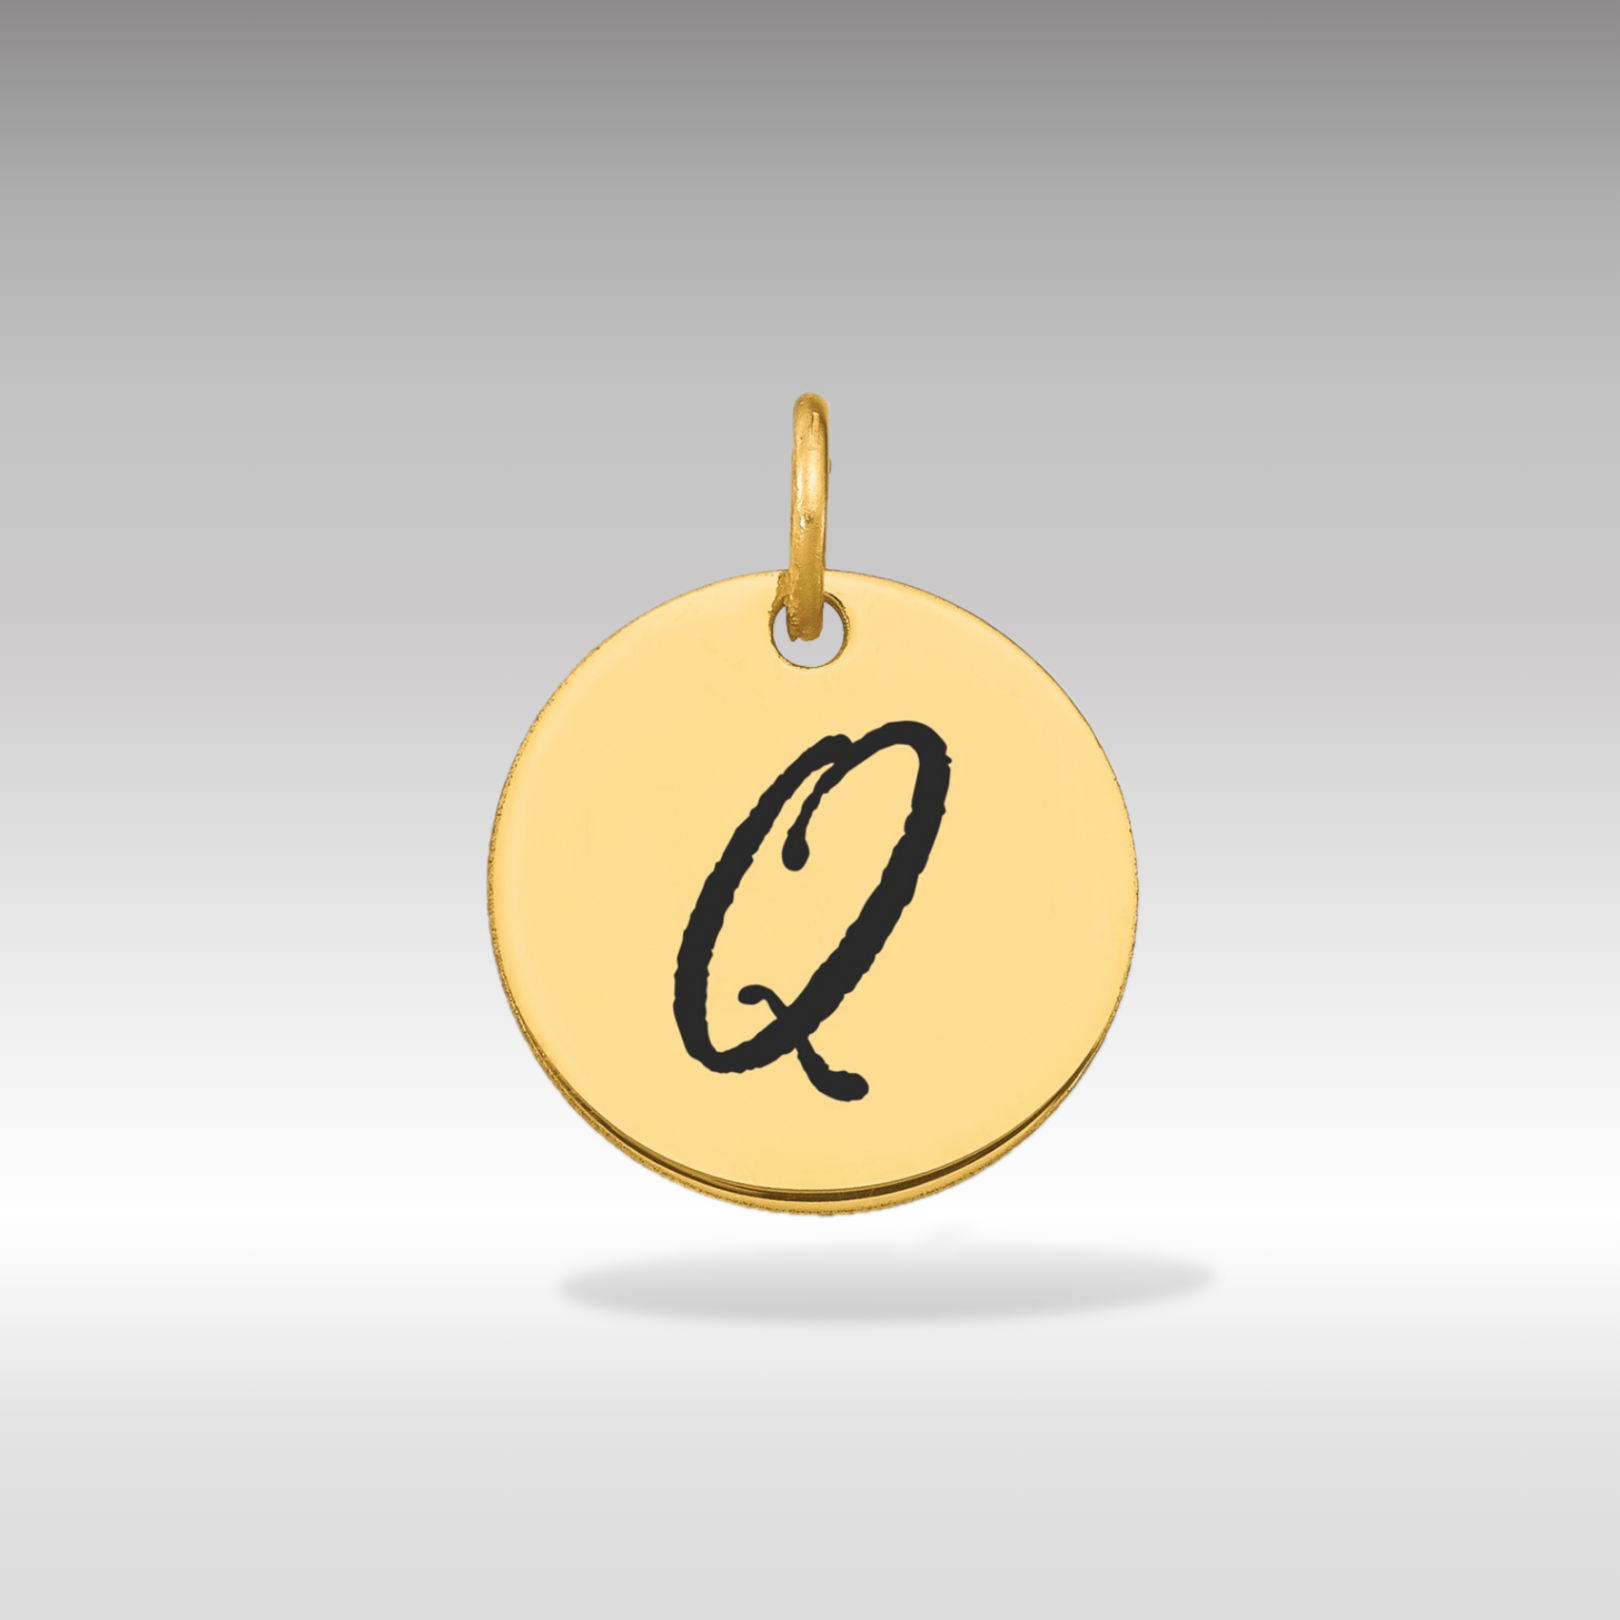 14K Gold Script Letter 'Q' Circular Charm with Black Enamel - Charlie & Co. Jewelry